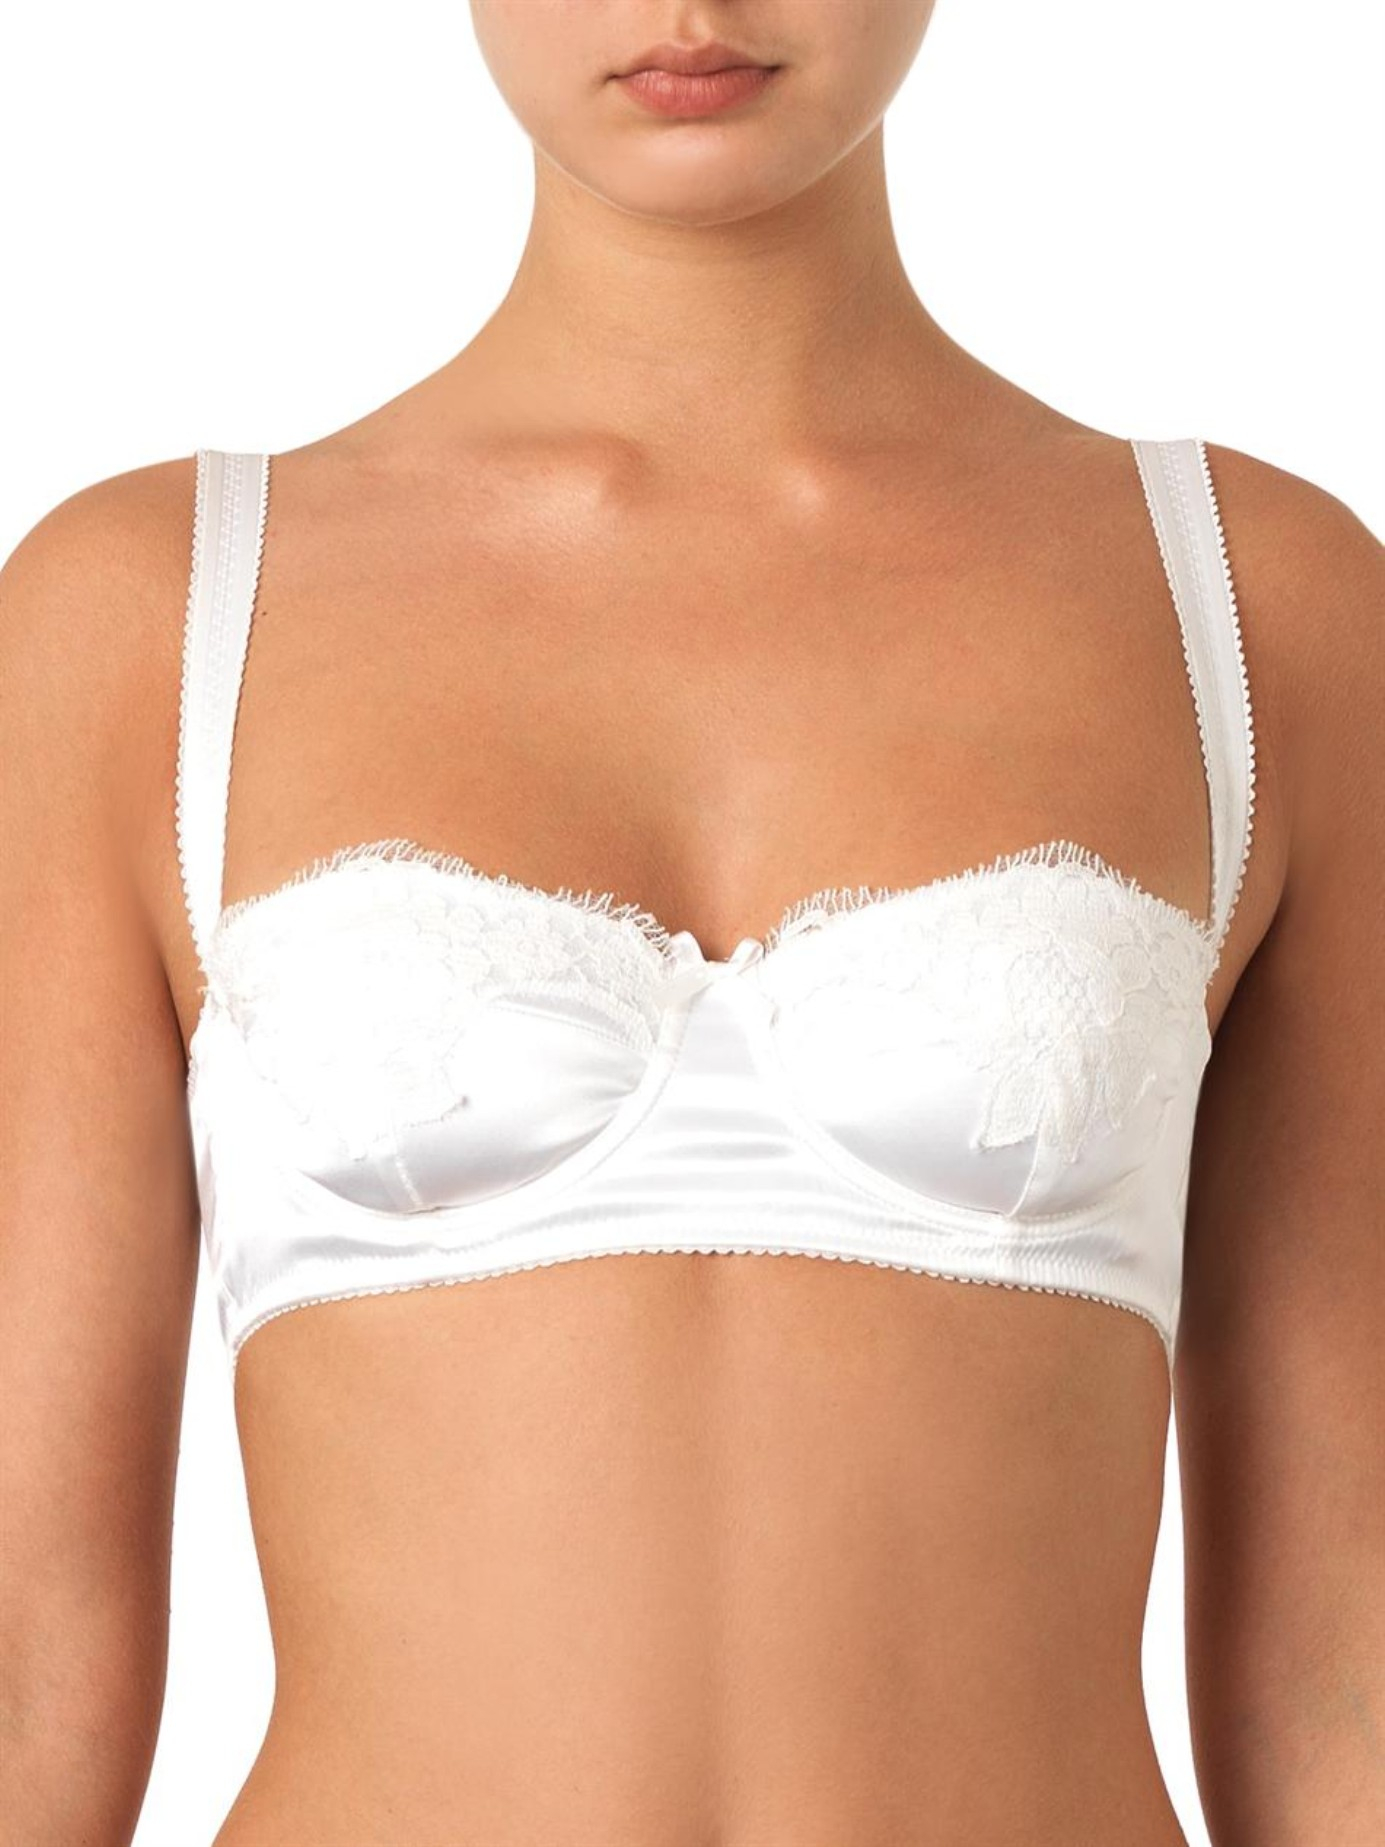 Lyst Dolce And Gabbana Lace And Satin Balconette Bra In White 1779